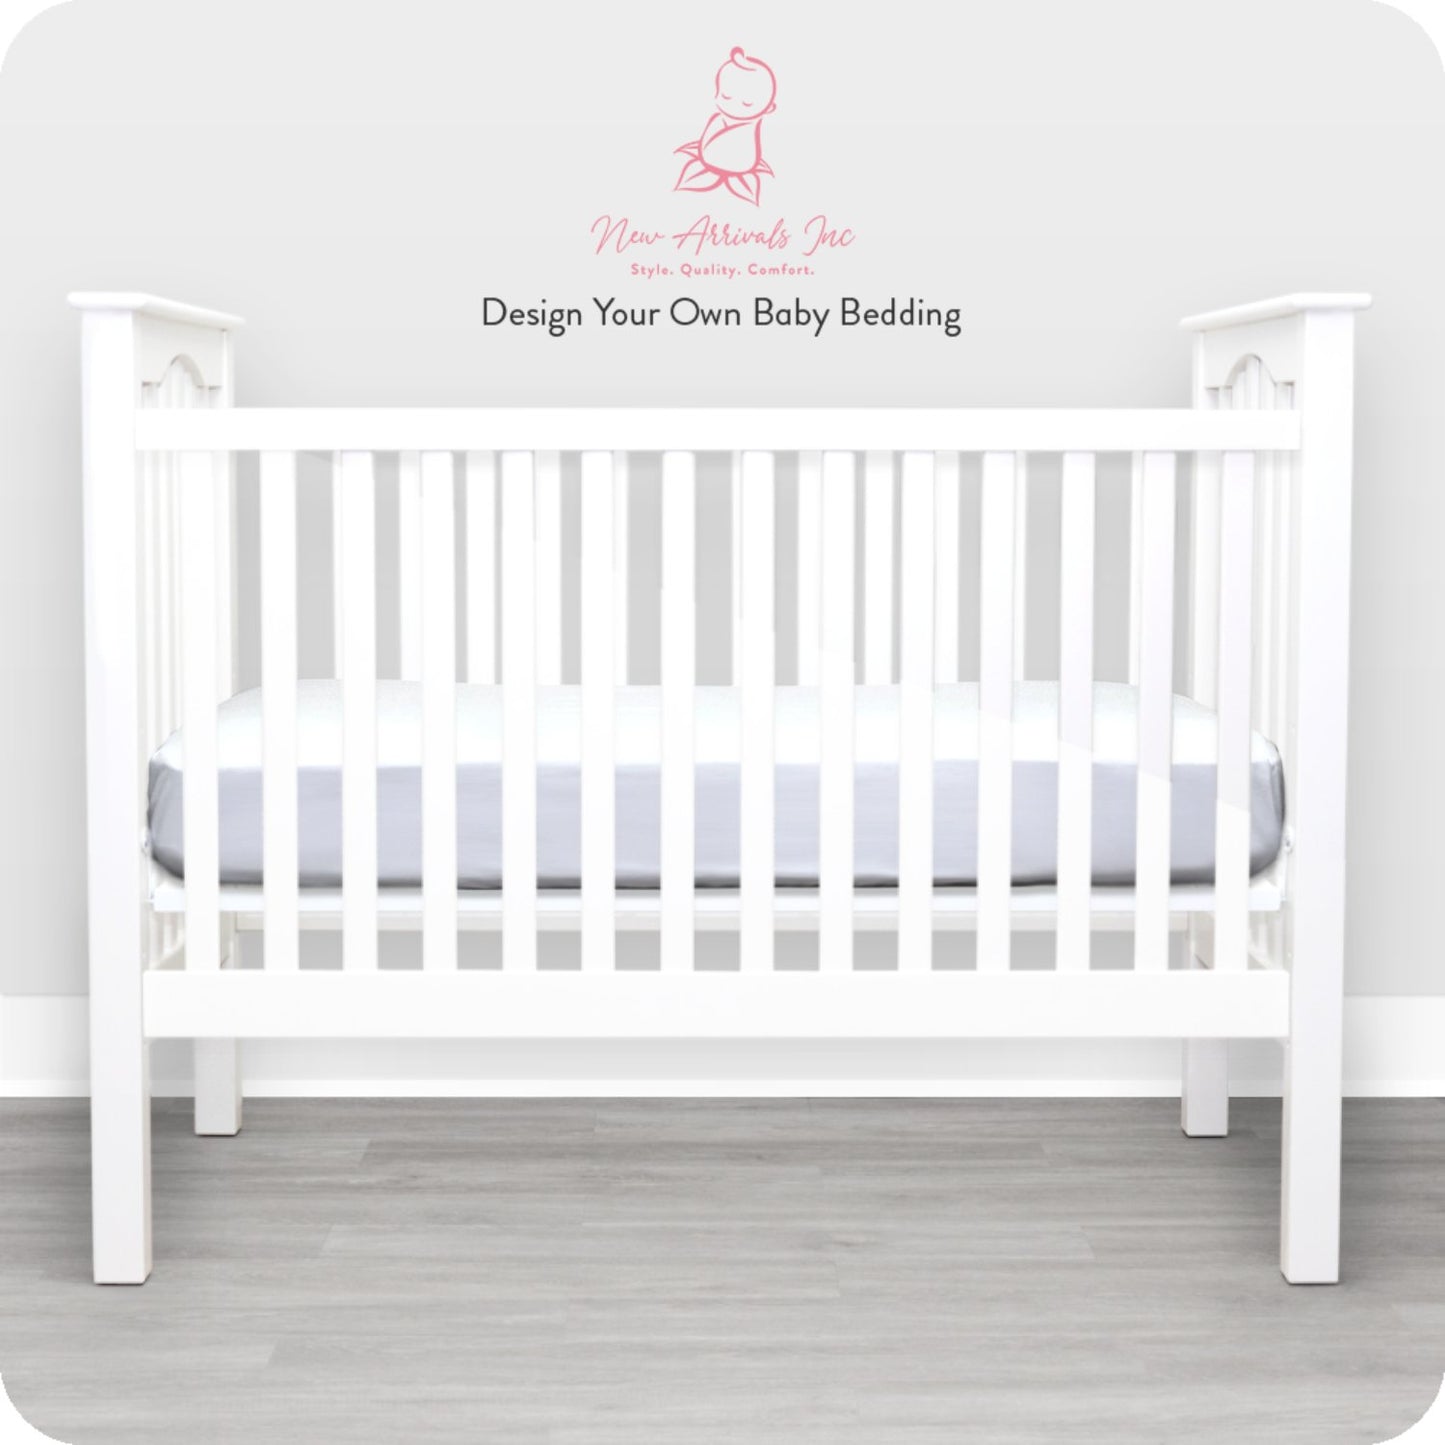 Design Your Own Baby Bedding - Crib Bedding - ID 9sF9XJjkbhay4OORu4MGXfpN - New Arrivals Inc